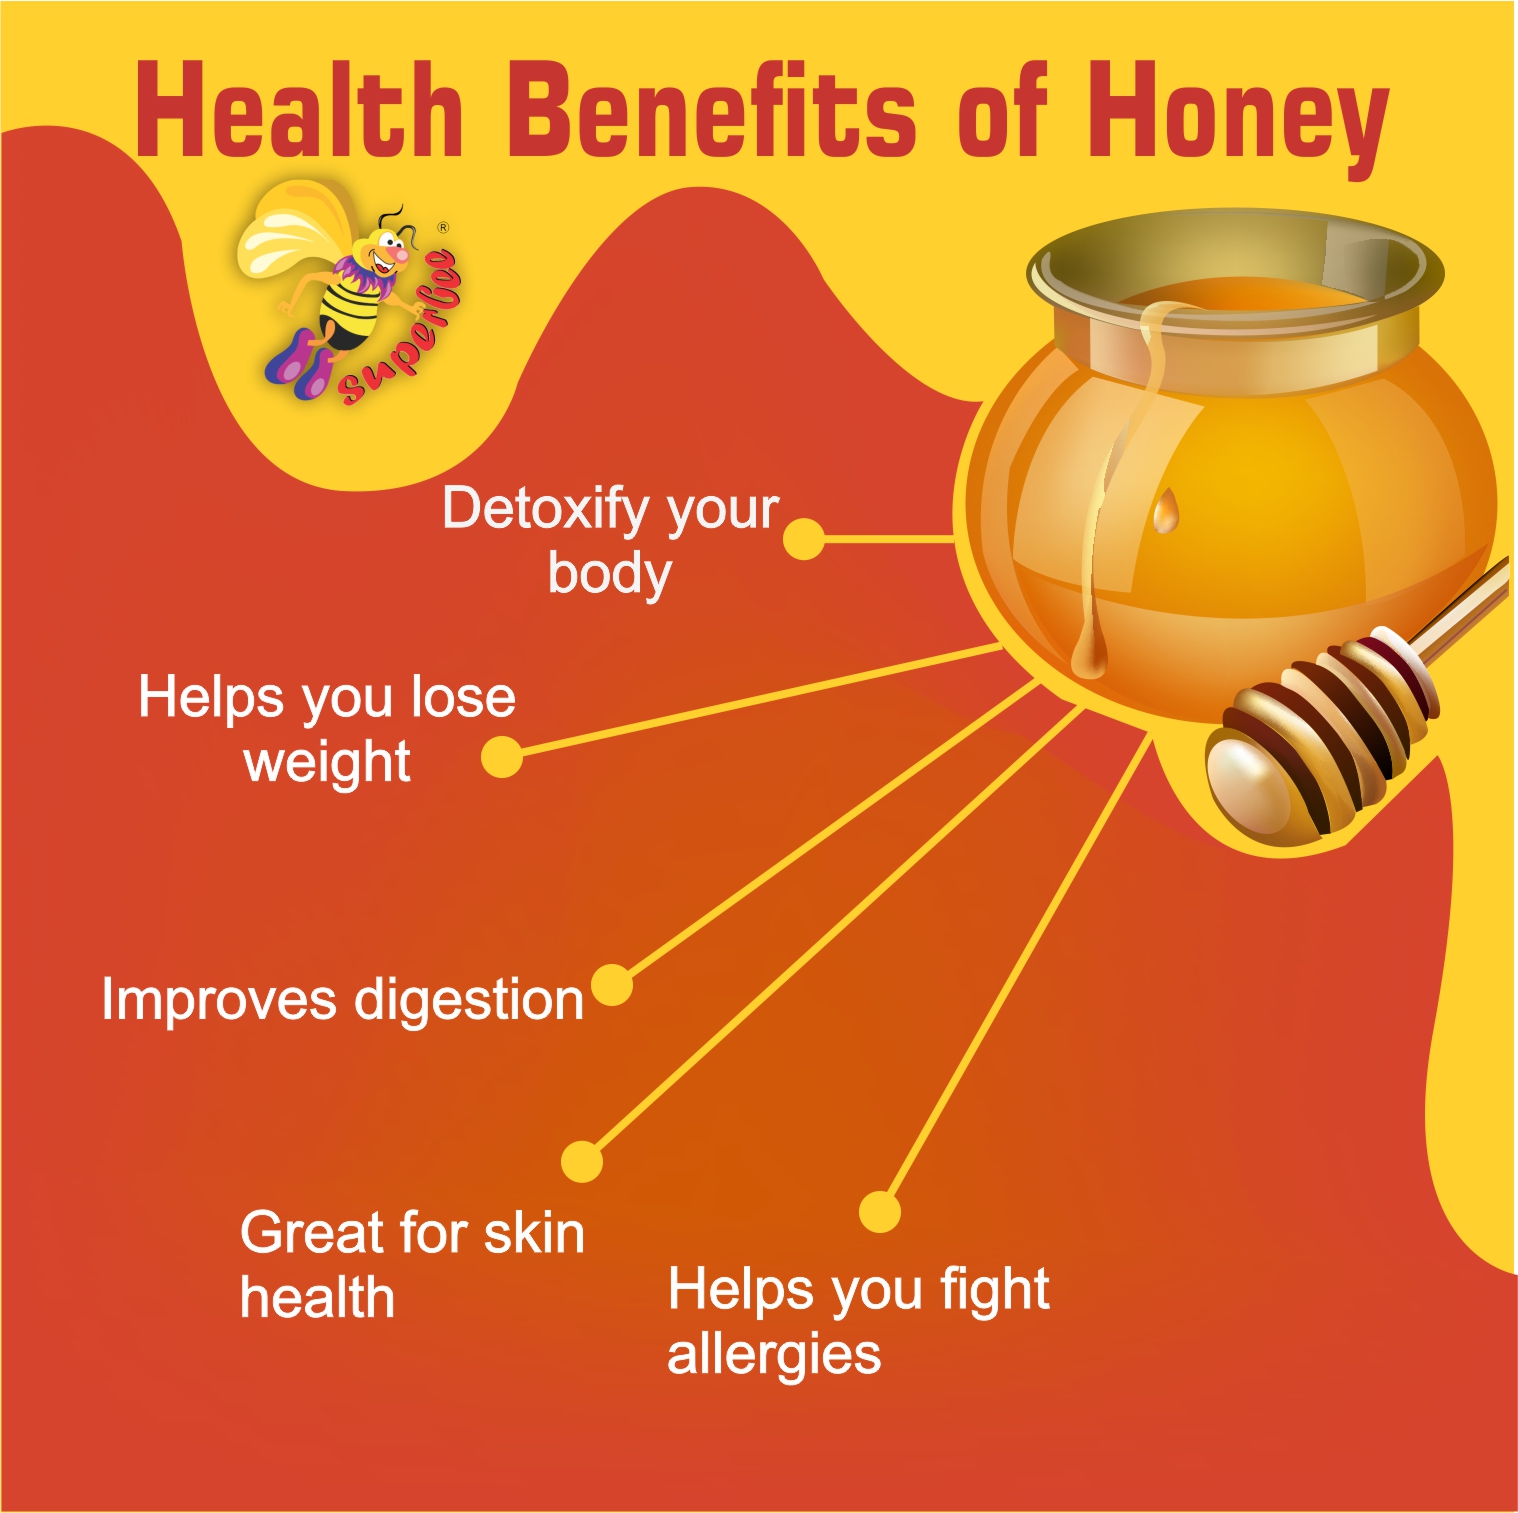 What Are The Health Benefits Of Honey?